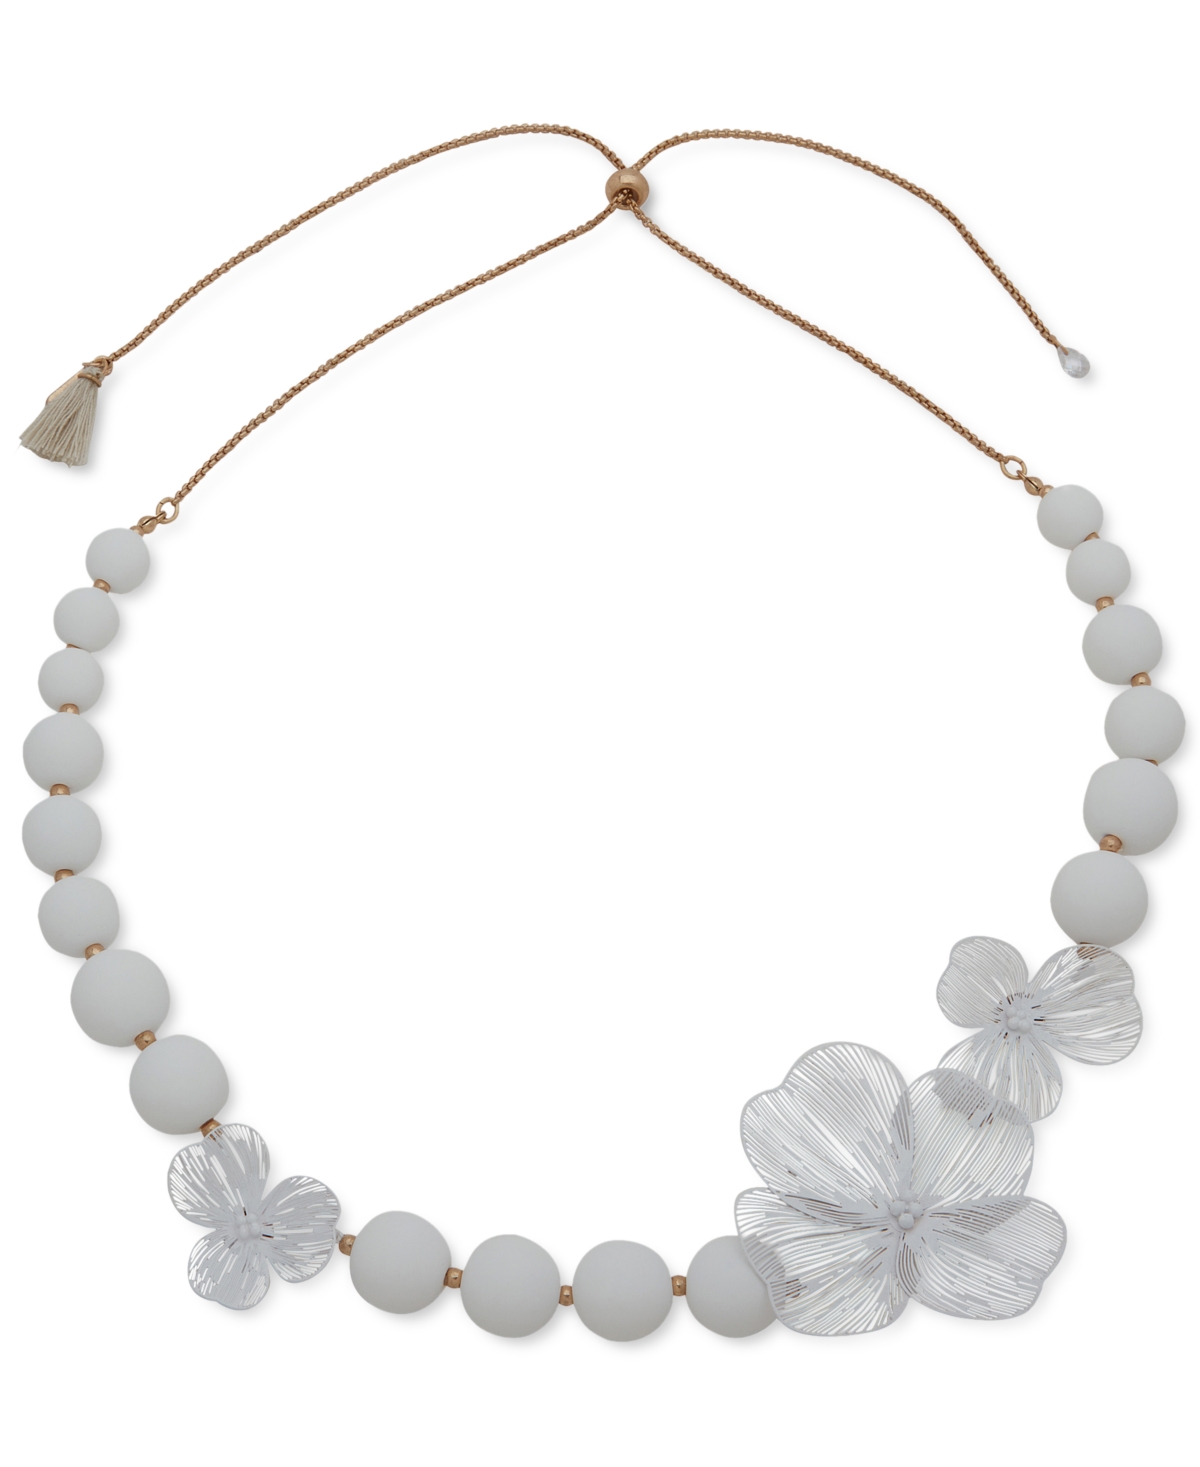 Lonna & Lilly Gold-tone Color Artistic Flower Beaded 18" Adjustable Statement Necklace In White